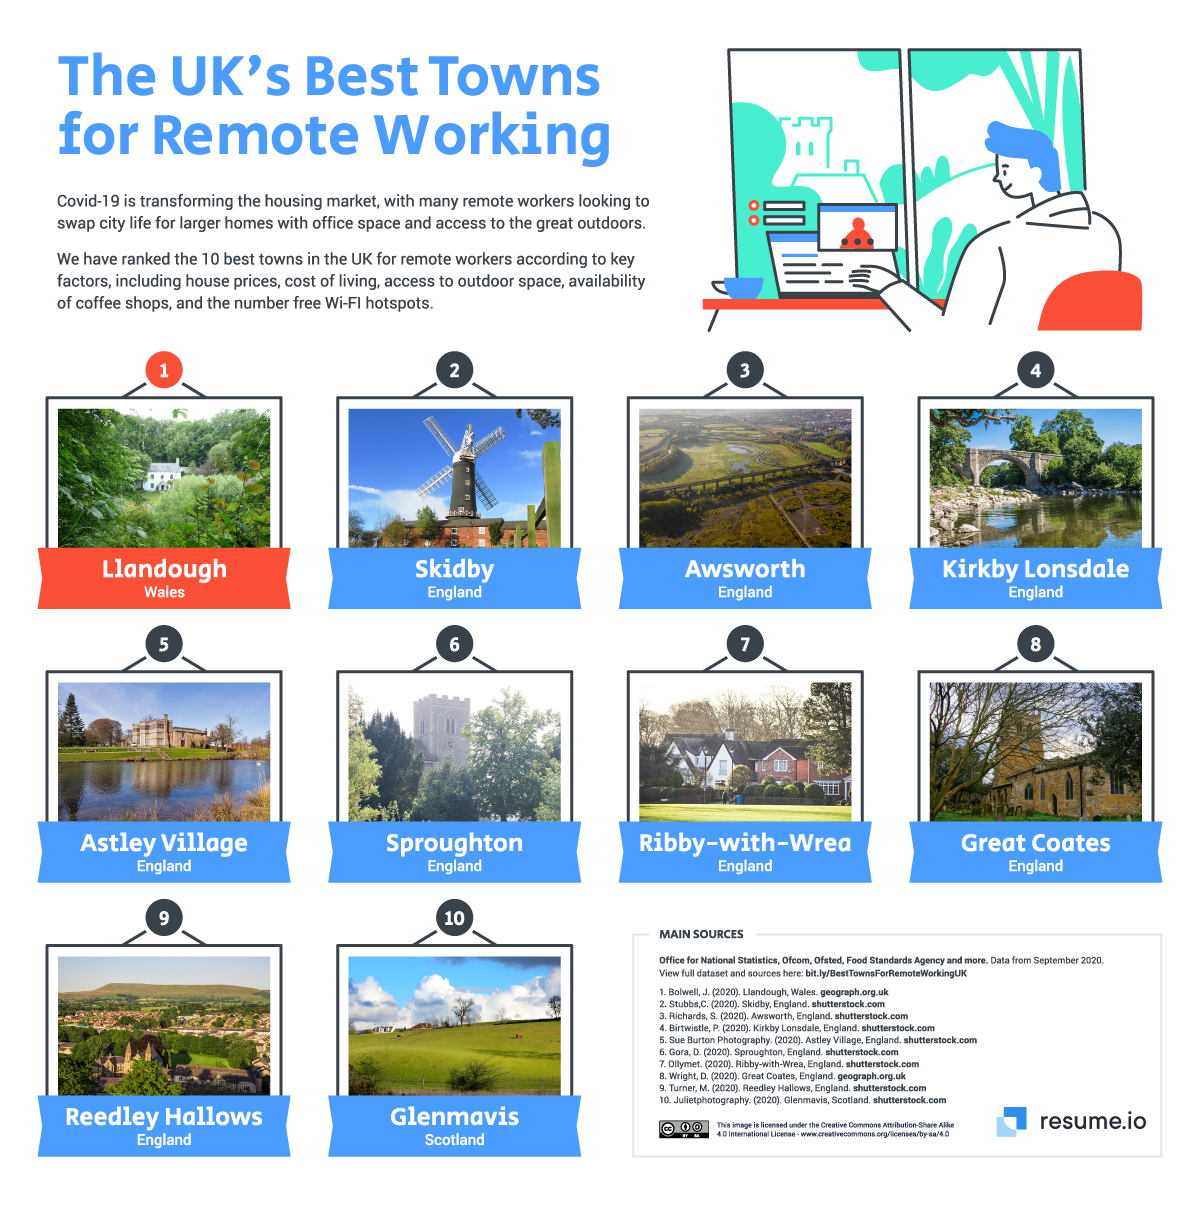 Escape to the country: Top 10 UK towns for remote working